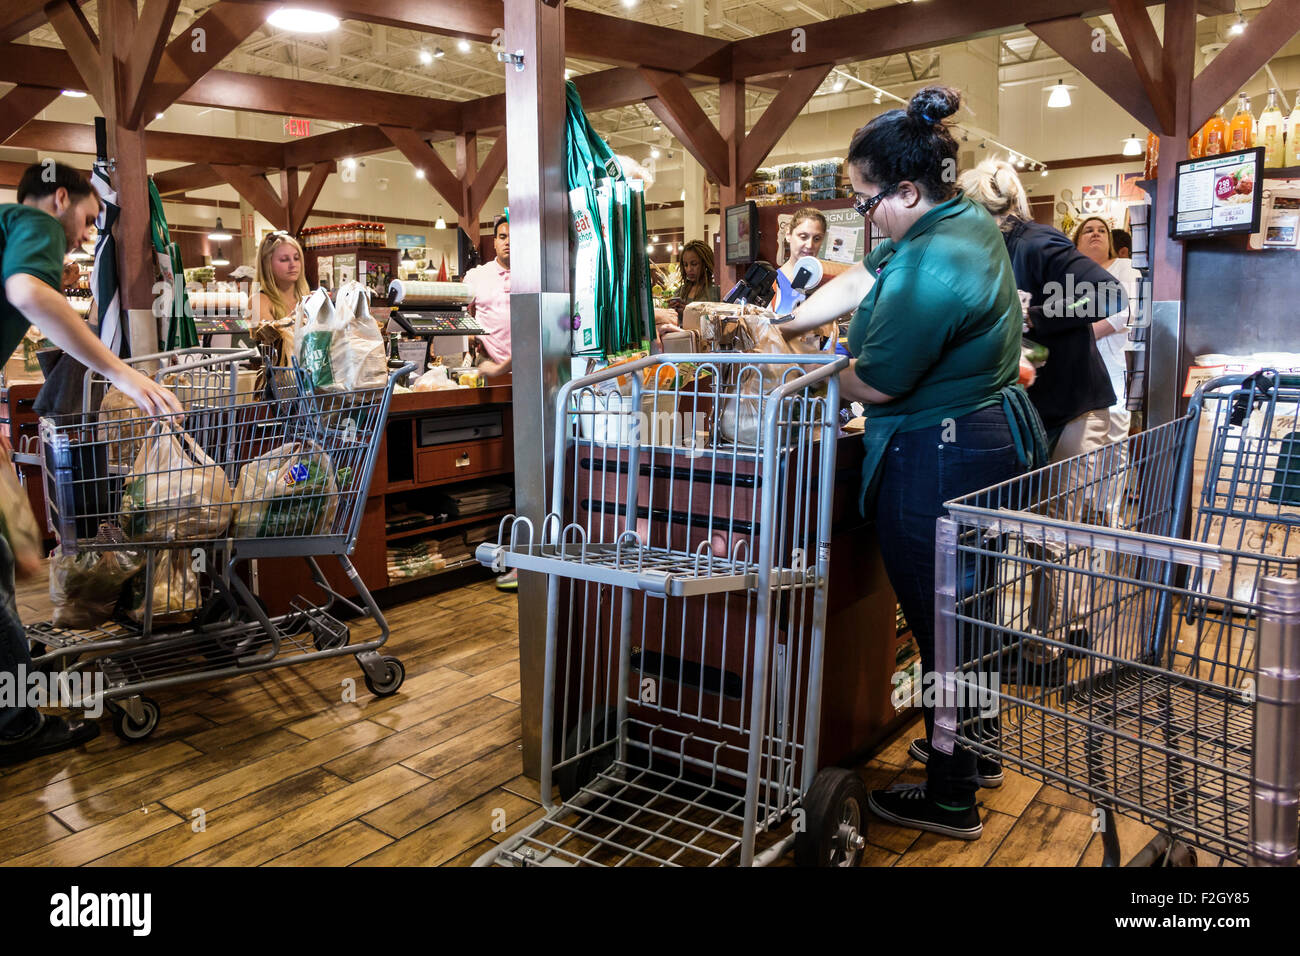 Delray Beach Florida,The Fresh Market,grocery store,supermarket,food,shopping shopper shoppers shop shops market markets marketplace buying selling,re Stock Photo